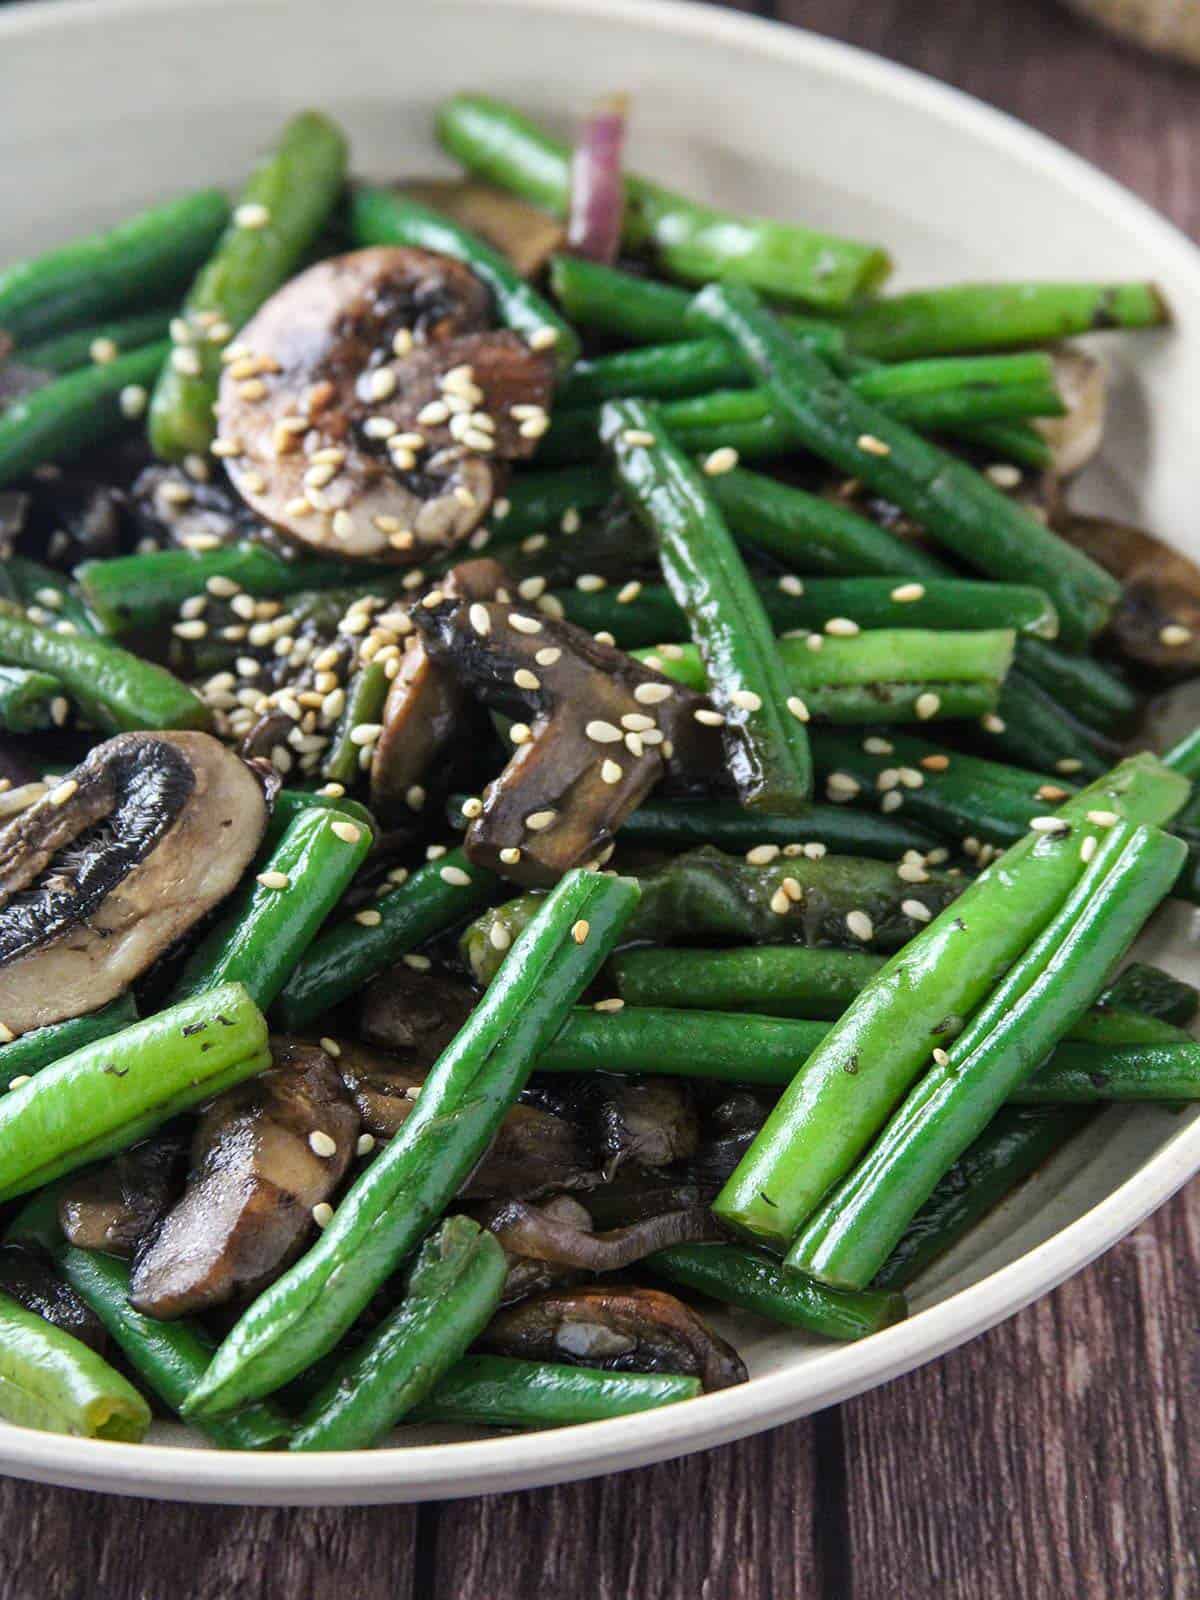 green beans stir-fry with mushrooms in a bowl